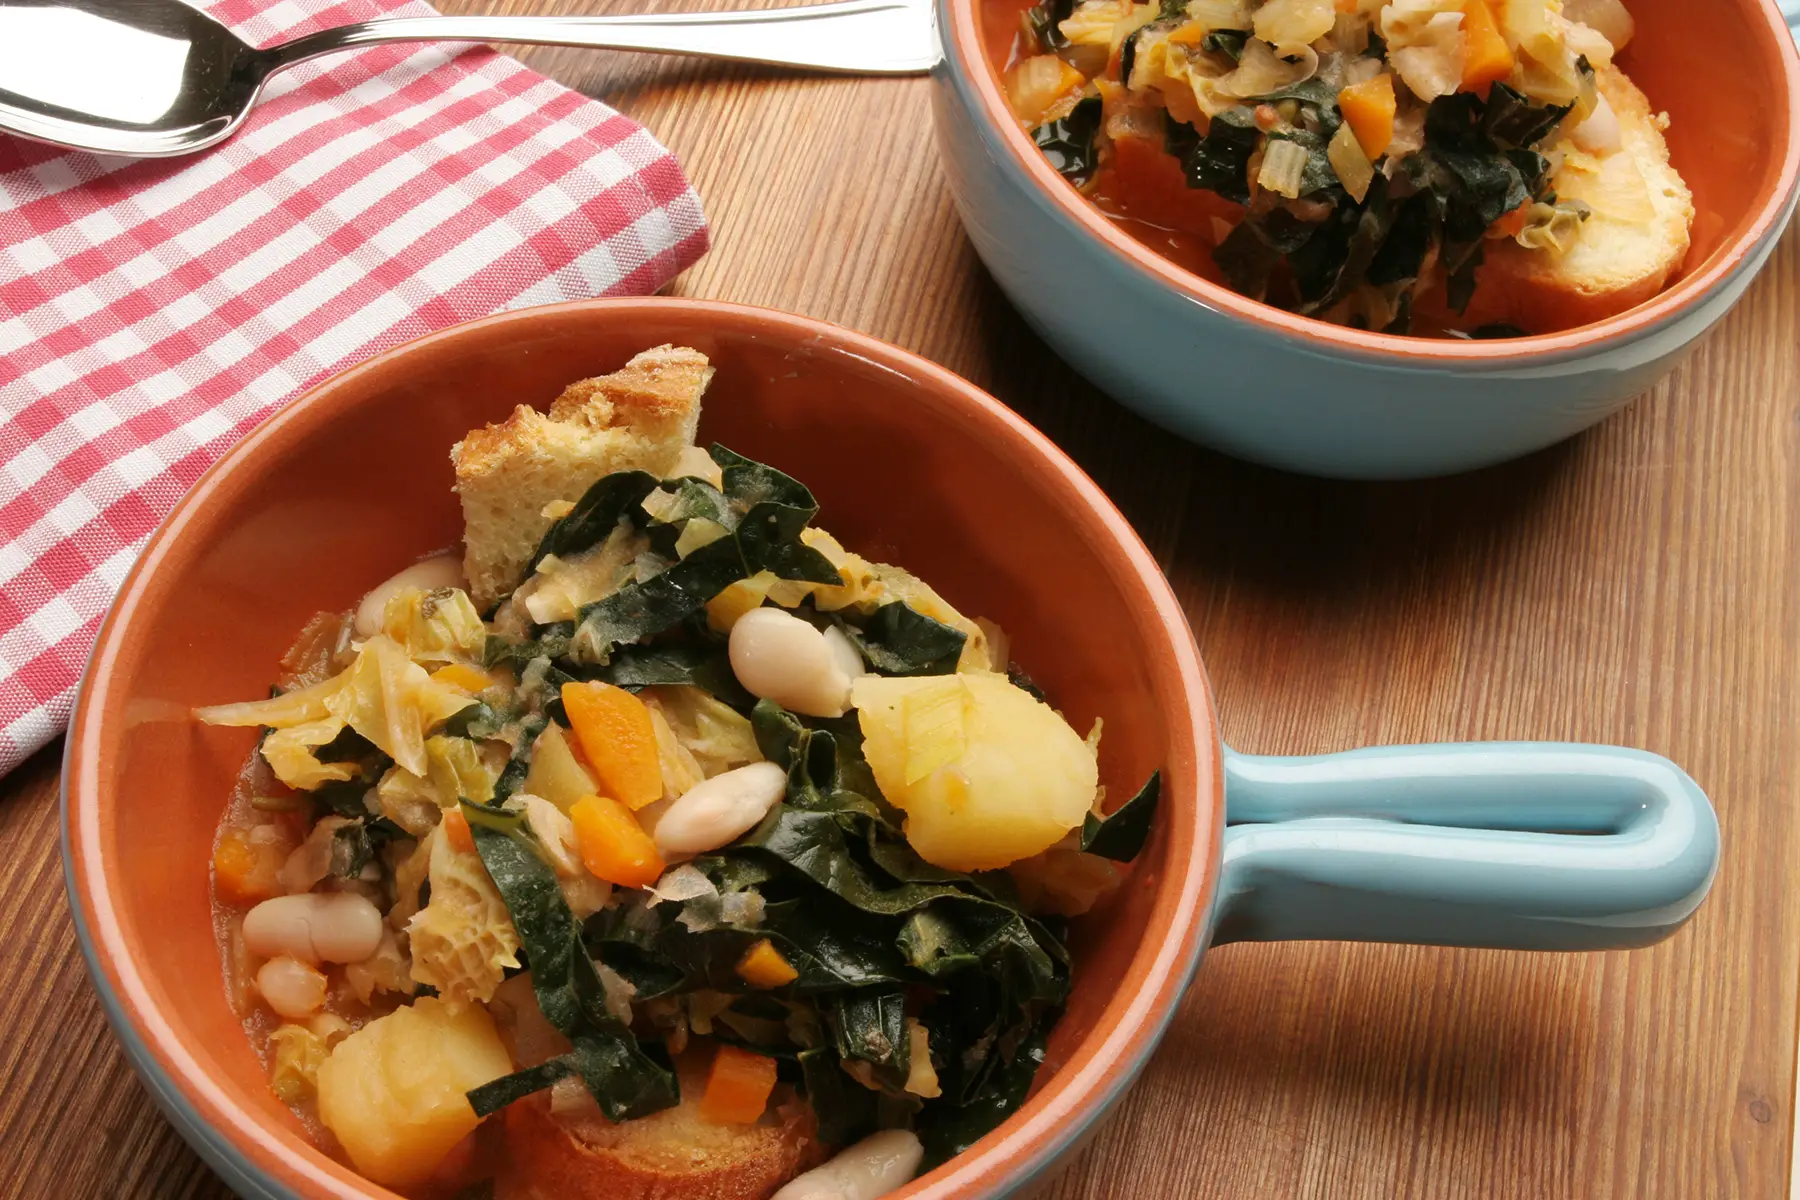 Ribollita – a chunky soup with beans, spinach, and stale bread in a brown bowl with a handle